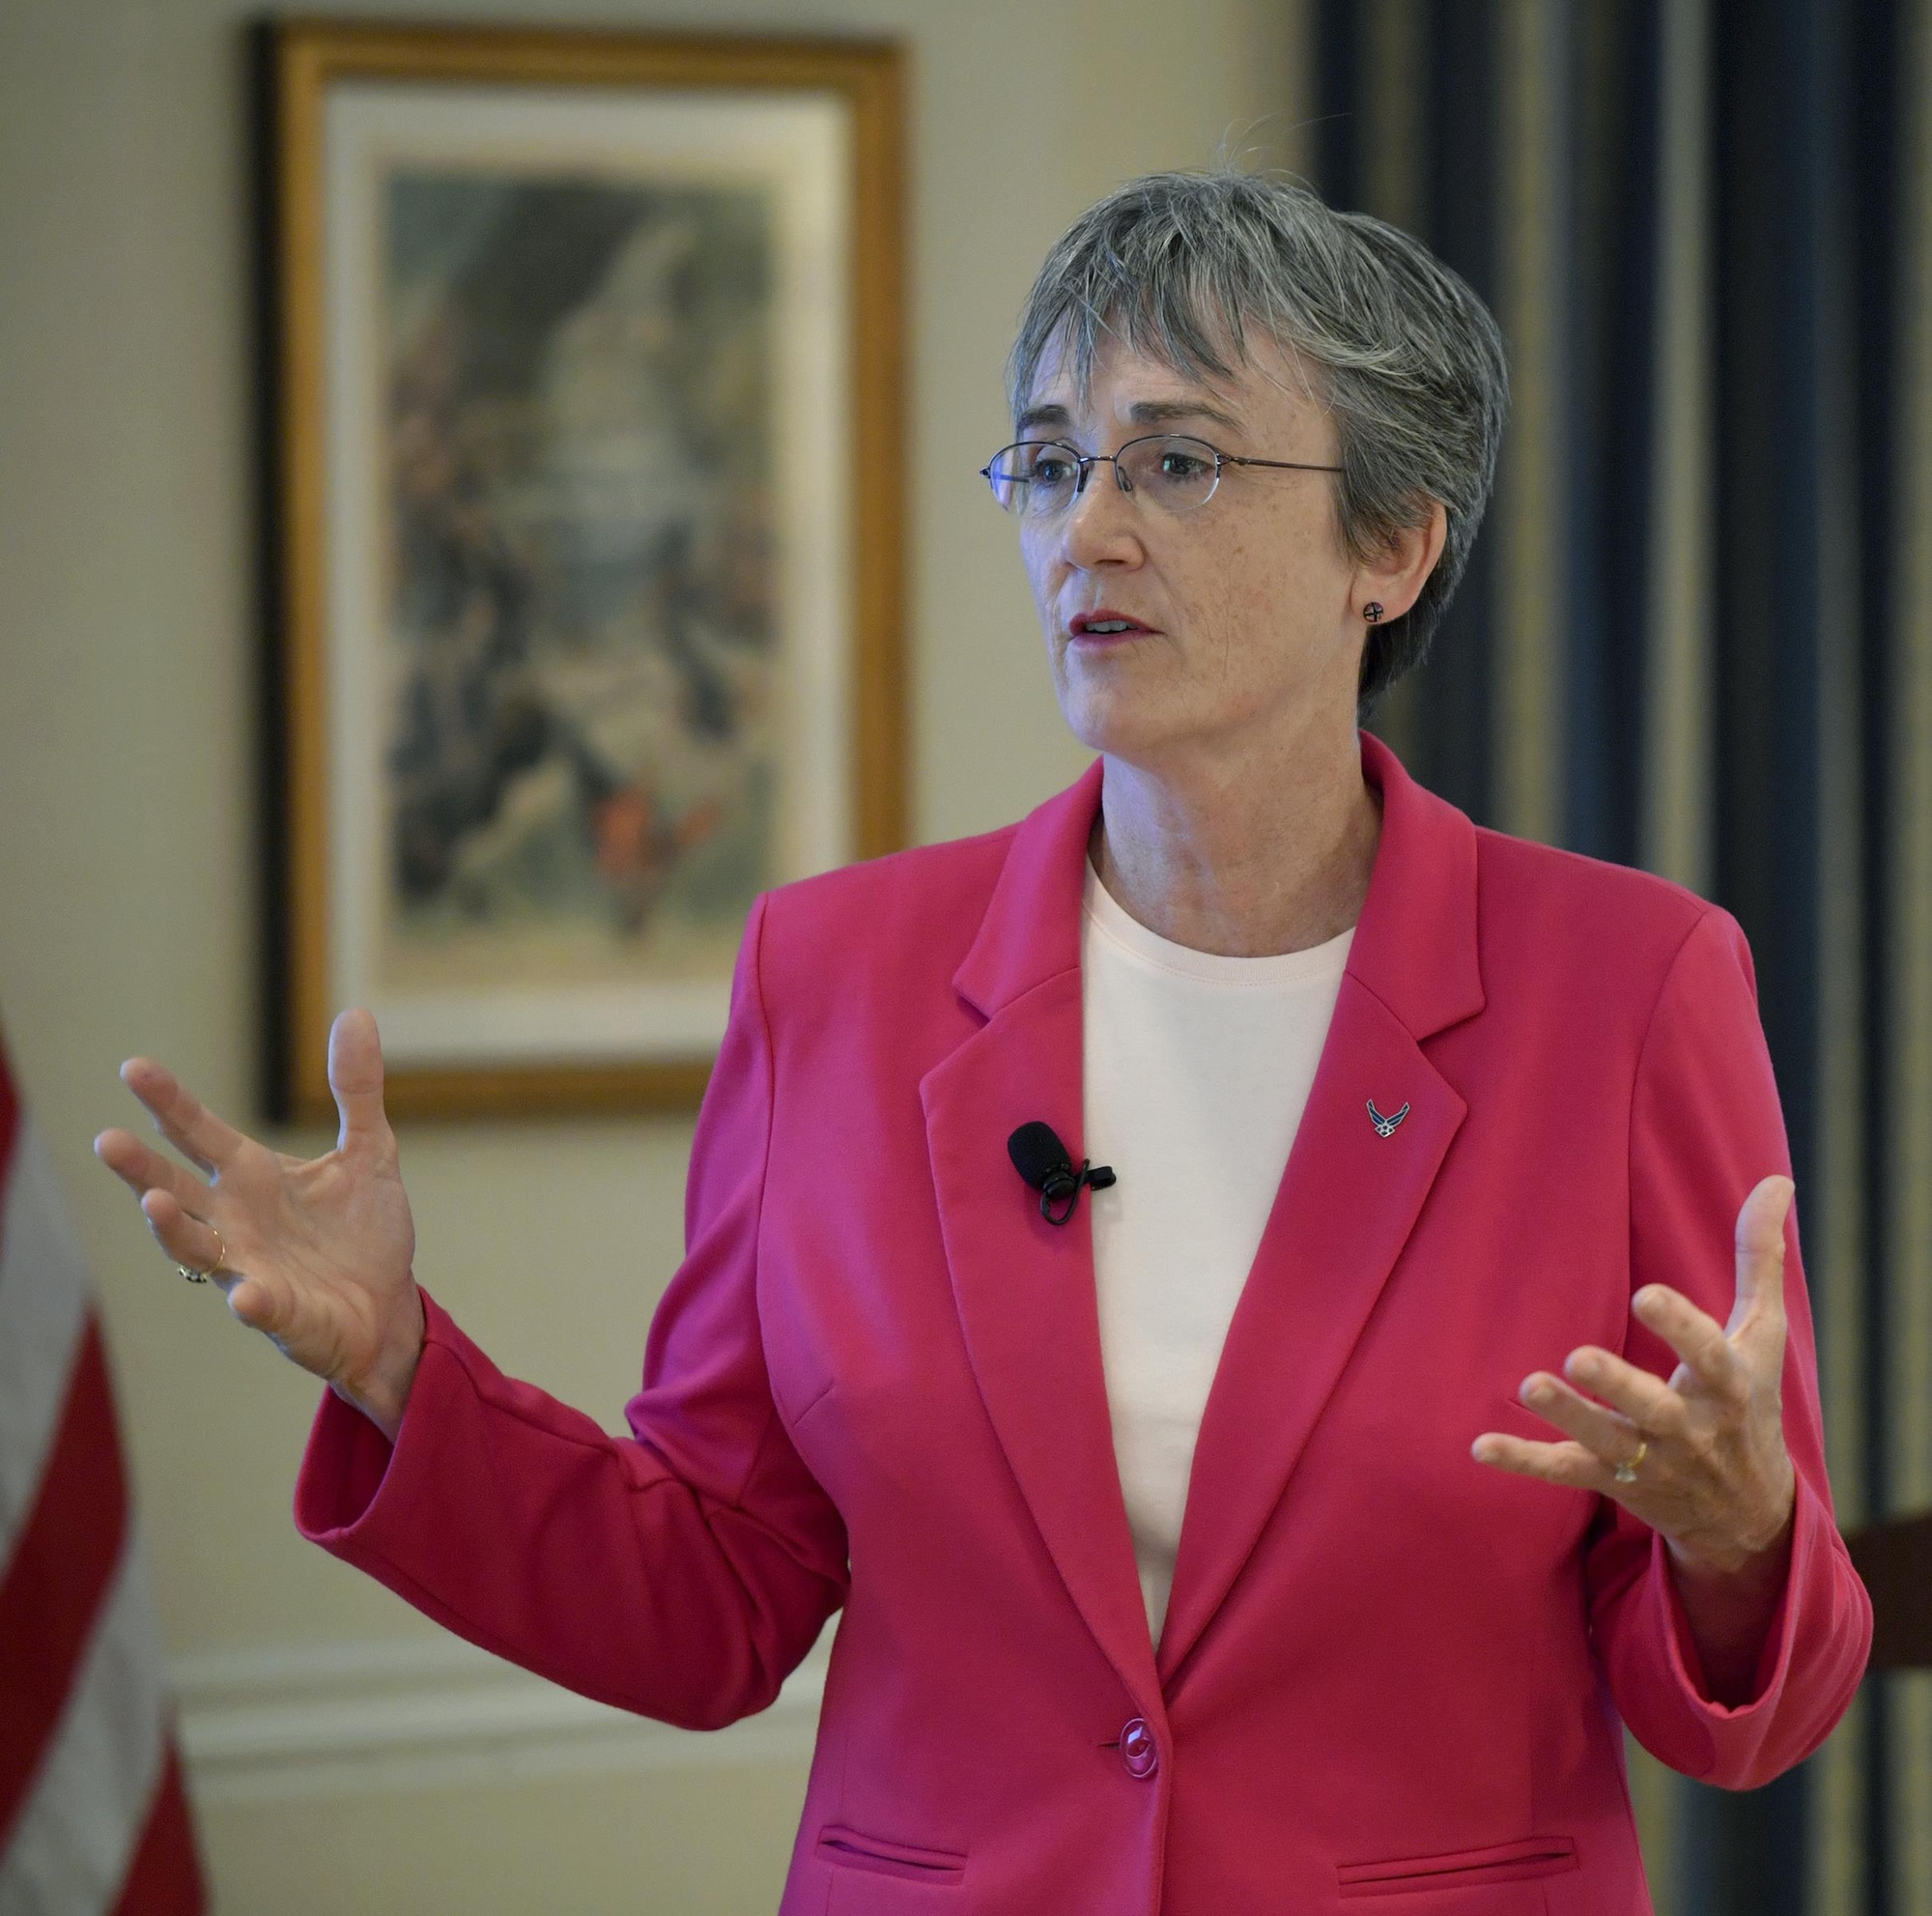 Secretary of the Air Force Heather Wilson has approved the reorganization of the Air Force headquarters to establish a Deputy Chief of Staff for Space Operations, who will be a three-star Air Force general officer.